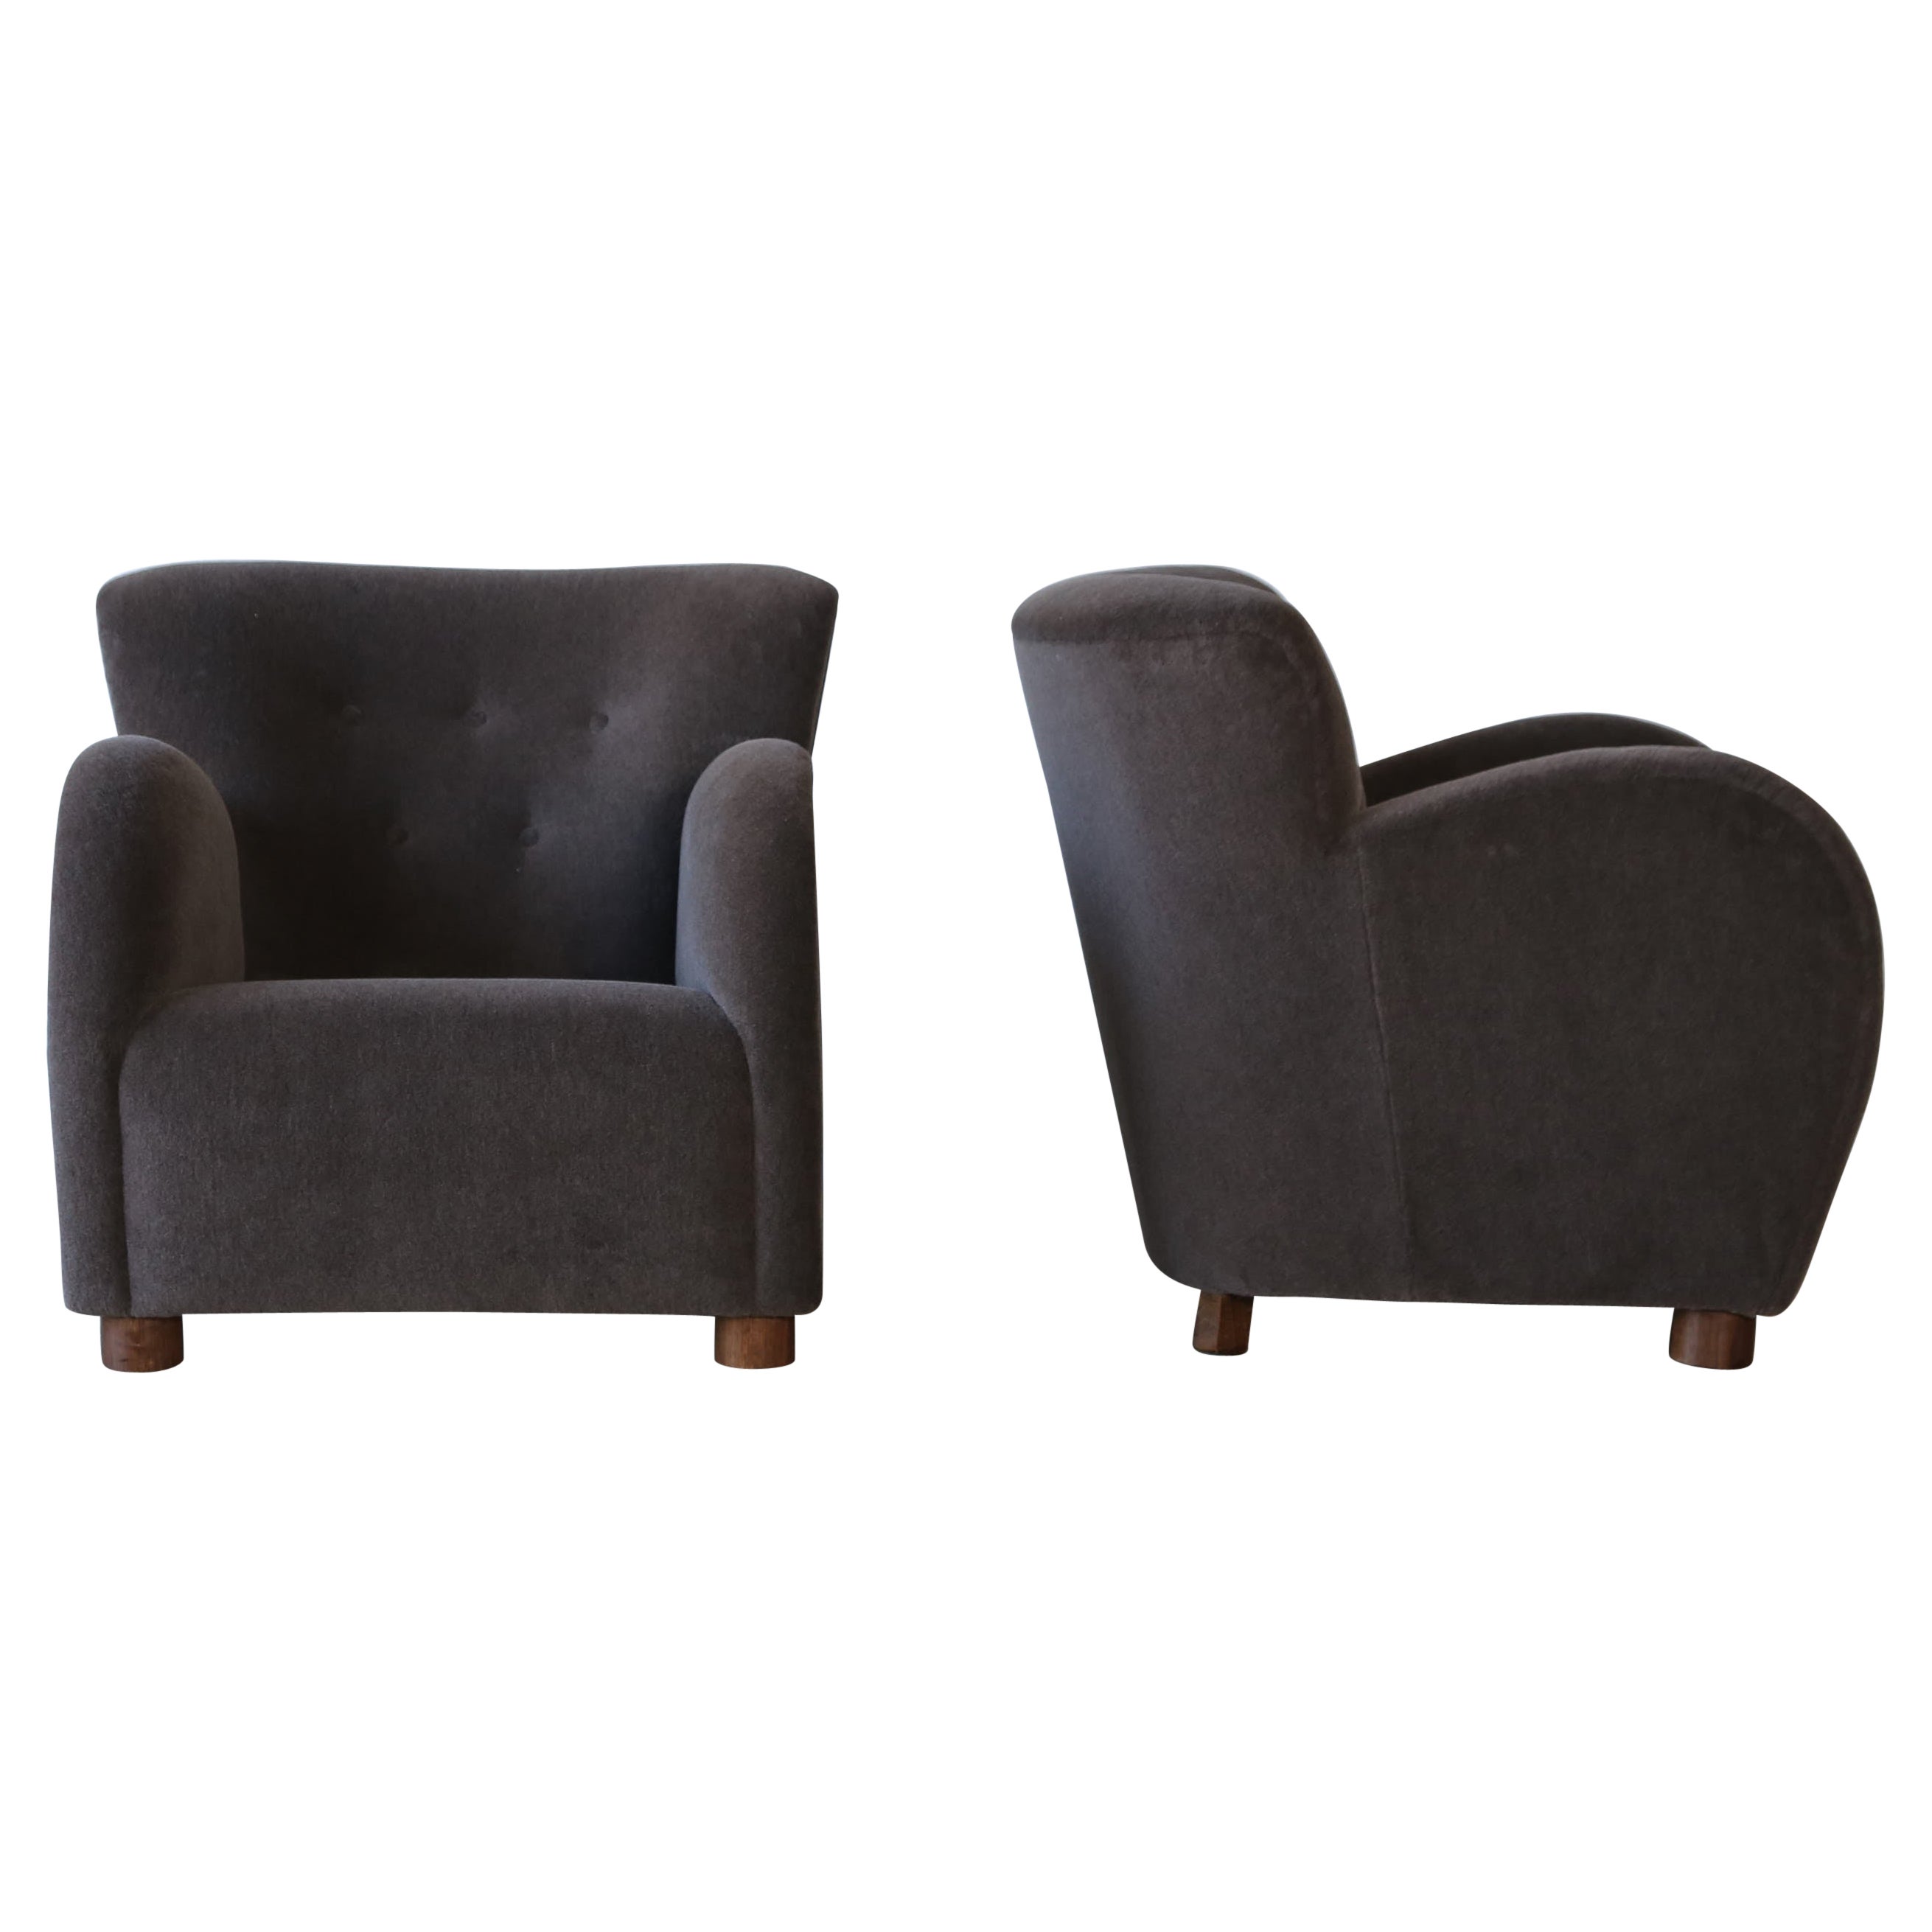 Superb Pair of Lounge Chairs, Upholstered in Pure Alpaca